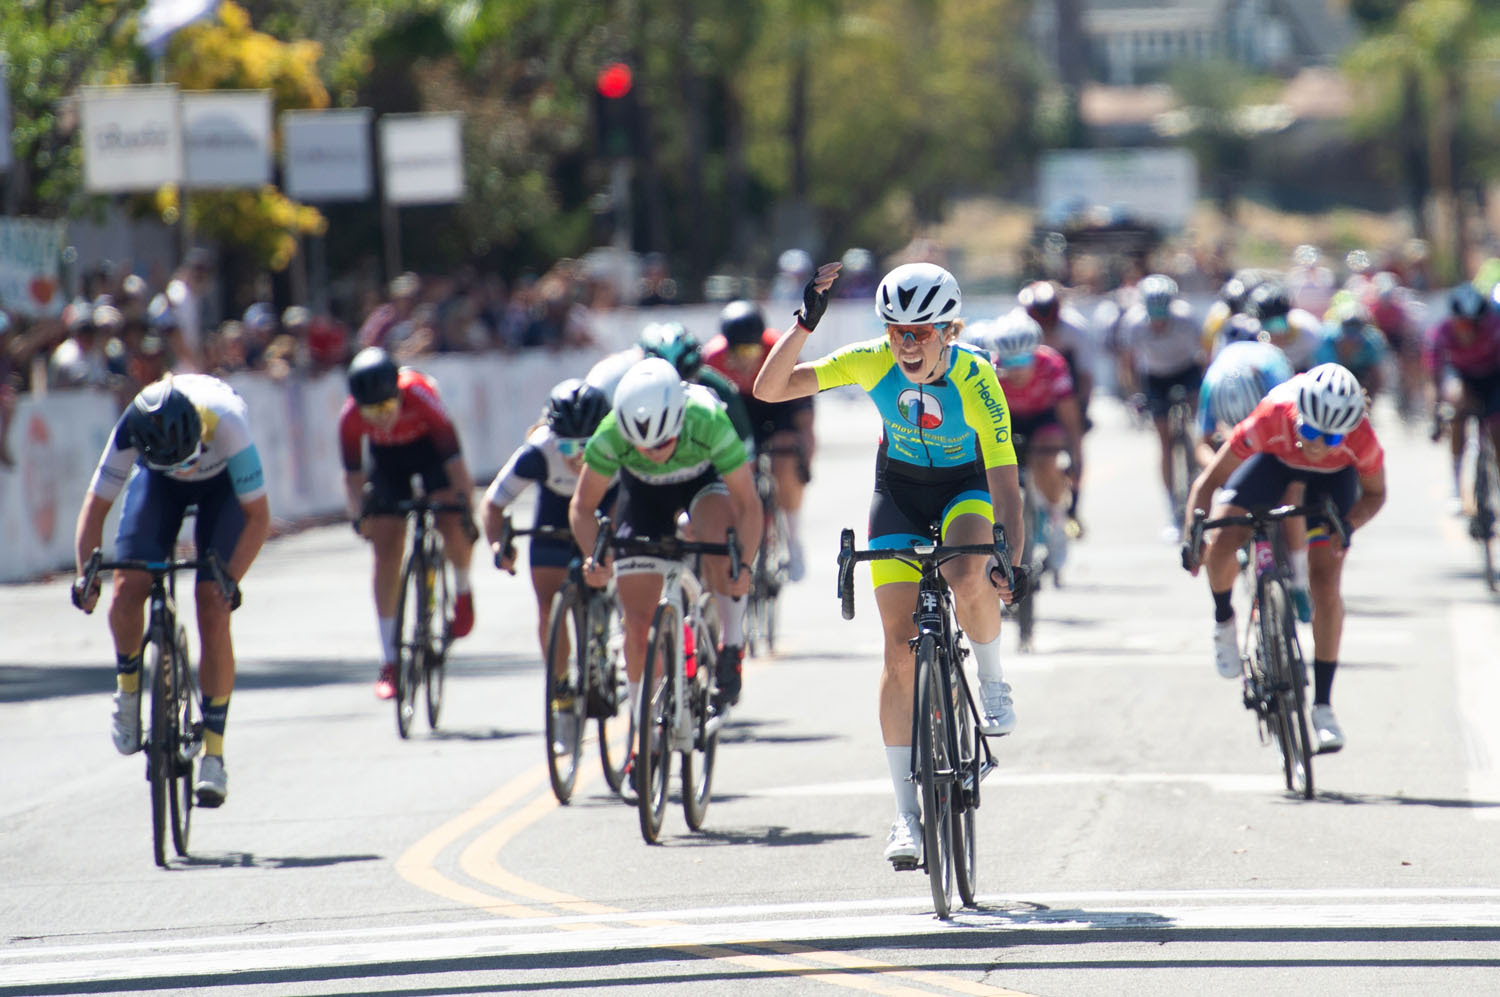 Cordova Steals The Win In Downtown Redlands Redlands Bicycle Classic